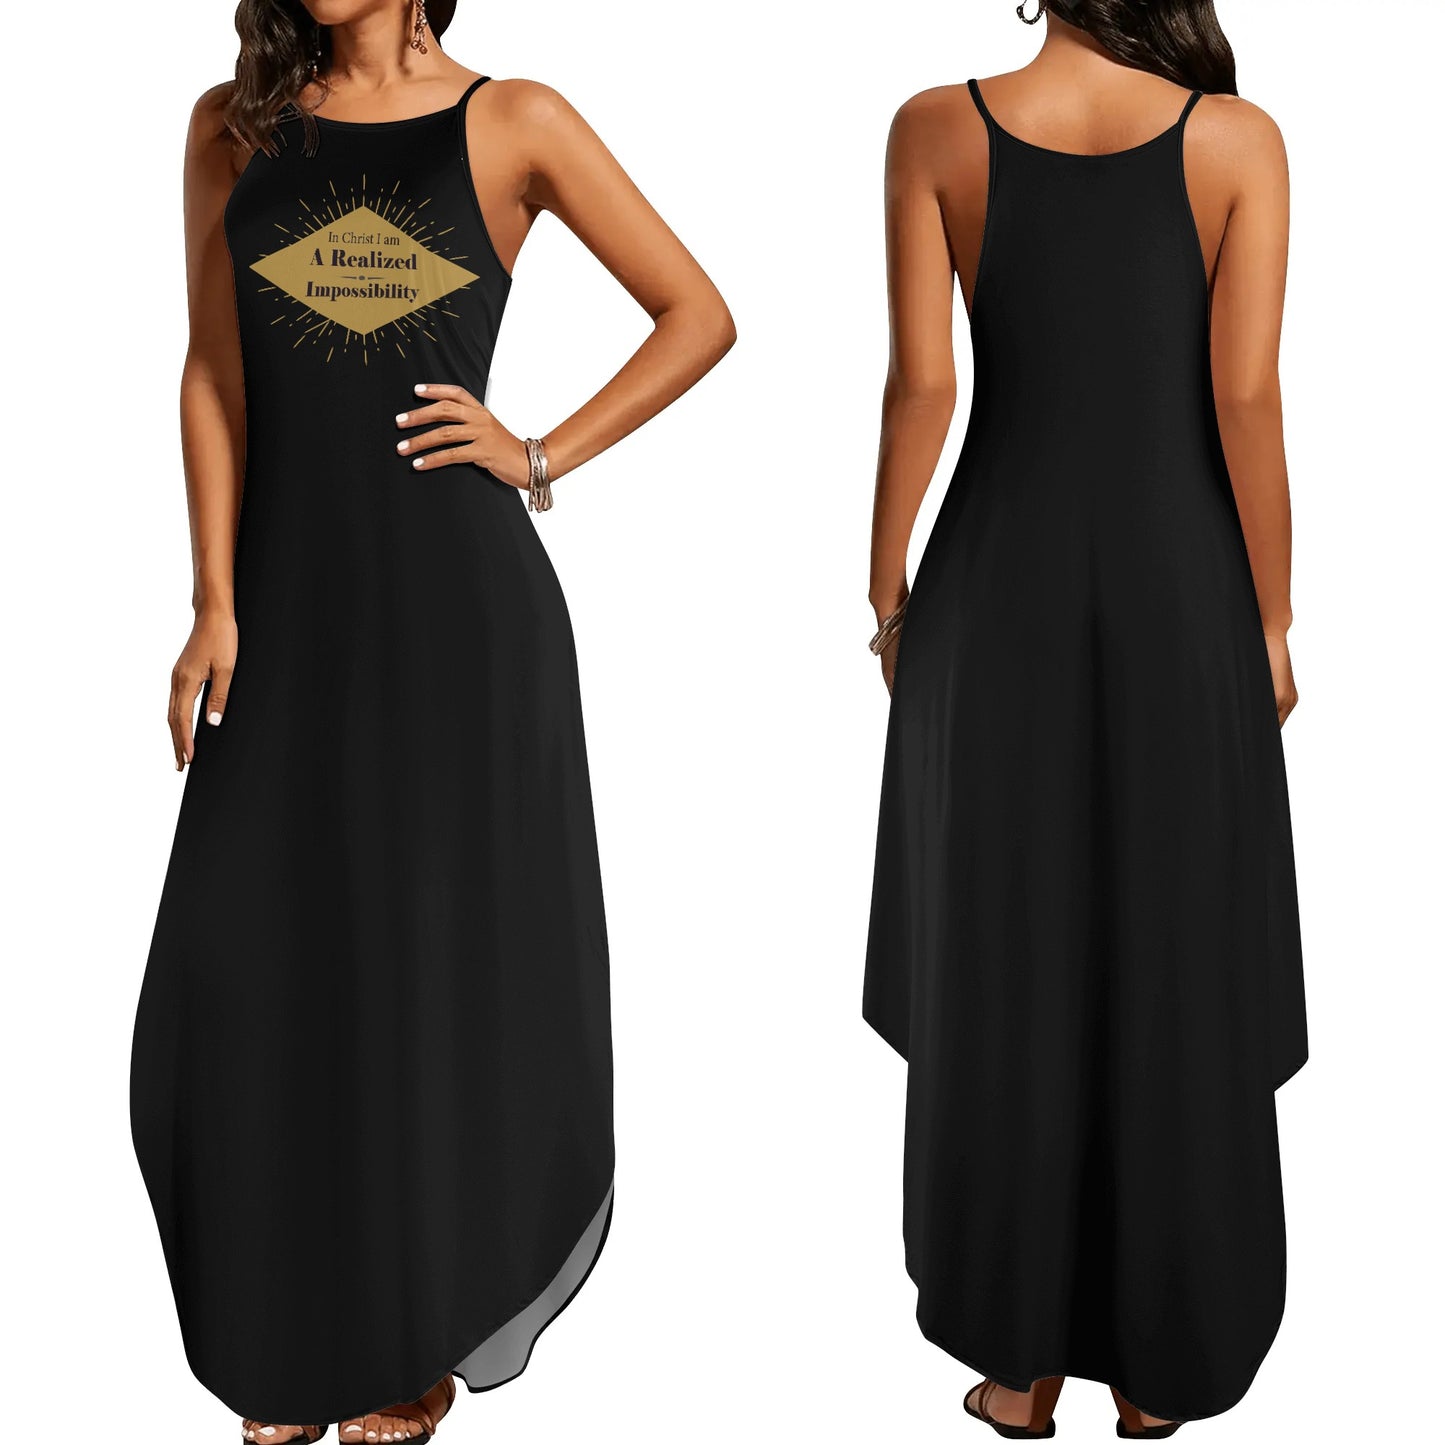 In Christ I Am A Realized Impossibility Womens Christian Elegant Sleeveless Summer Maxi Dress popcustoms